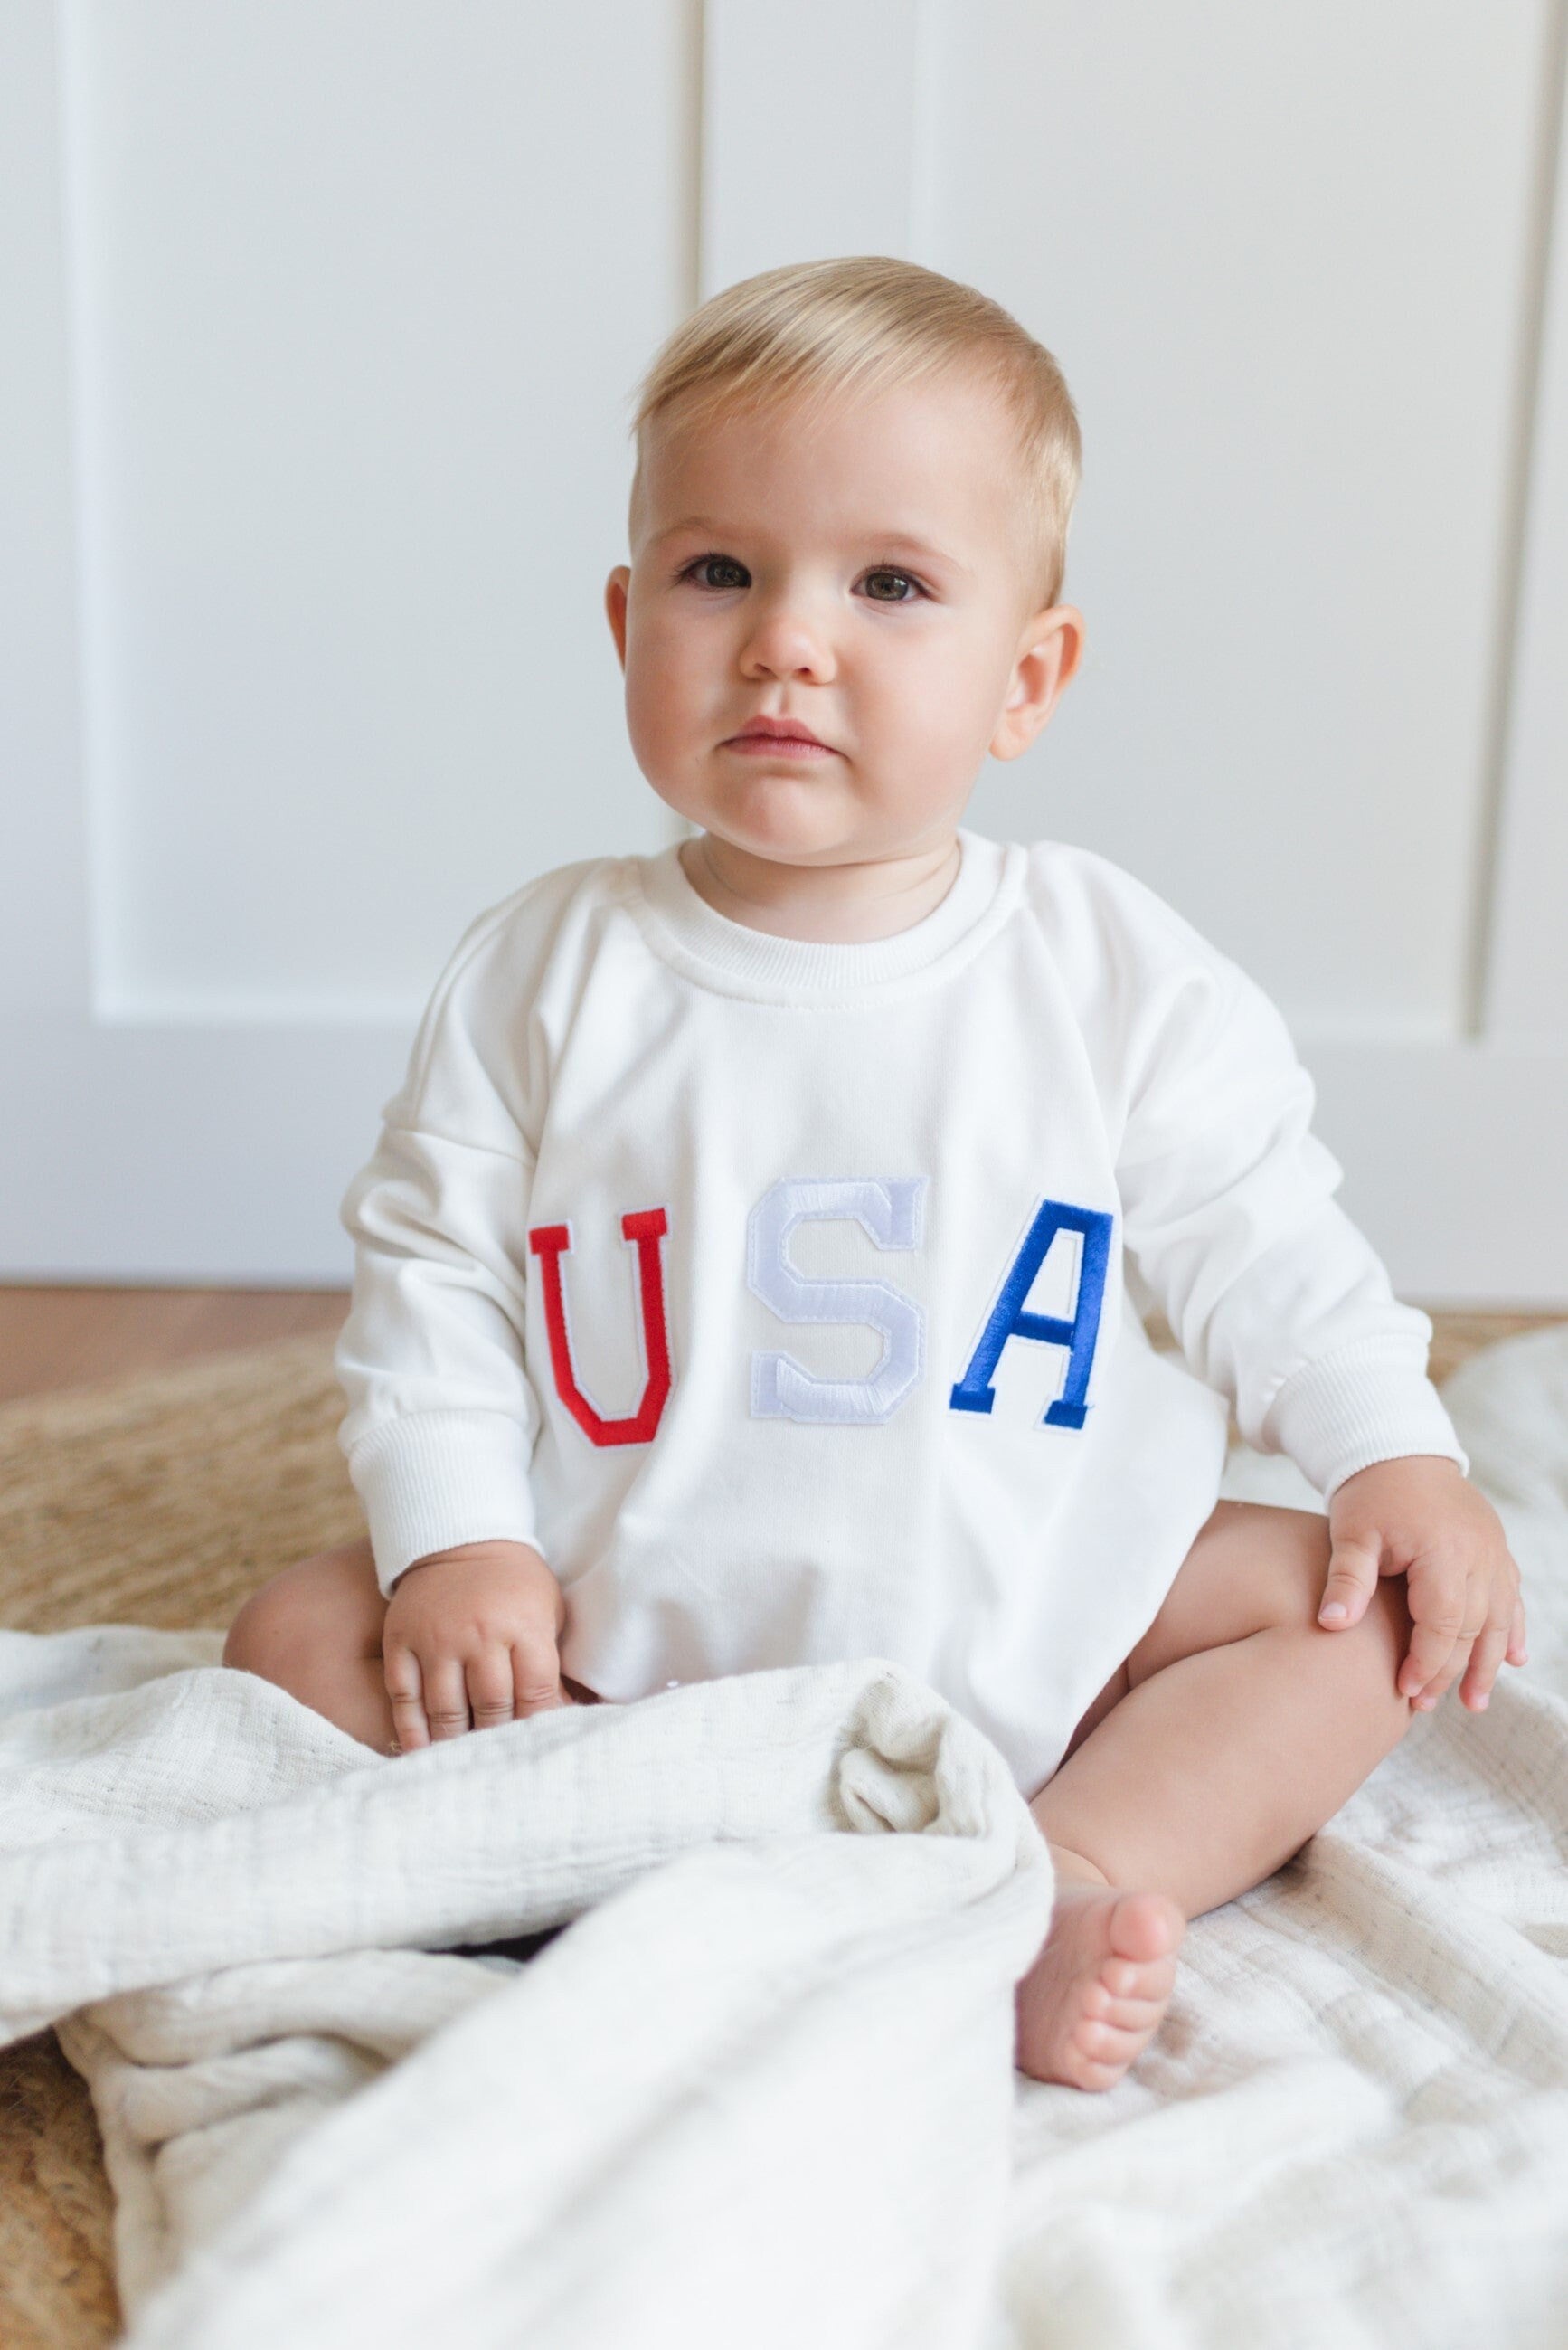 USA Applique Graphic Oversized Sweatshirt Romper - 4th of July Outfit - Patriotic Bubble Romper - Baby Girl Clothes - Baby Boy Outfit